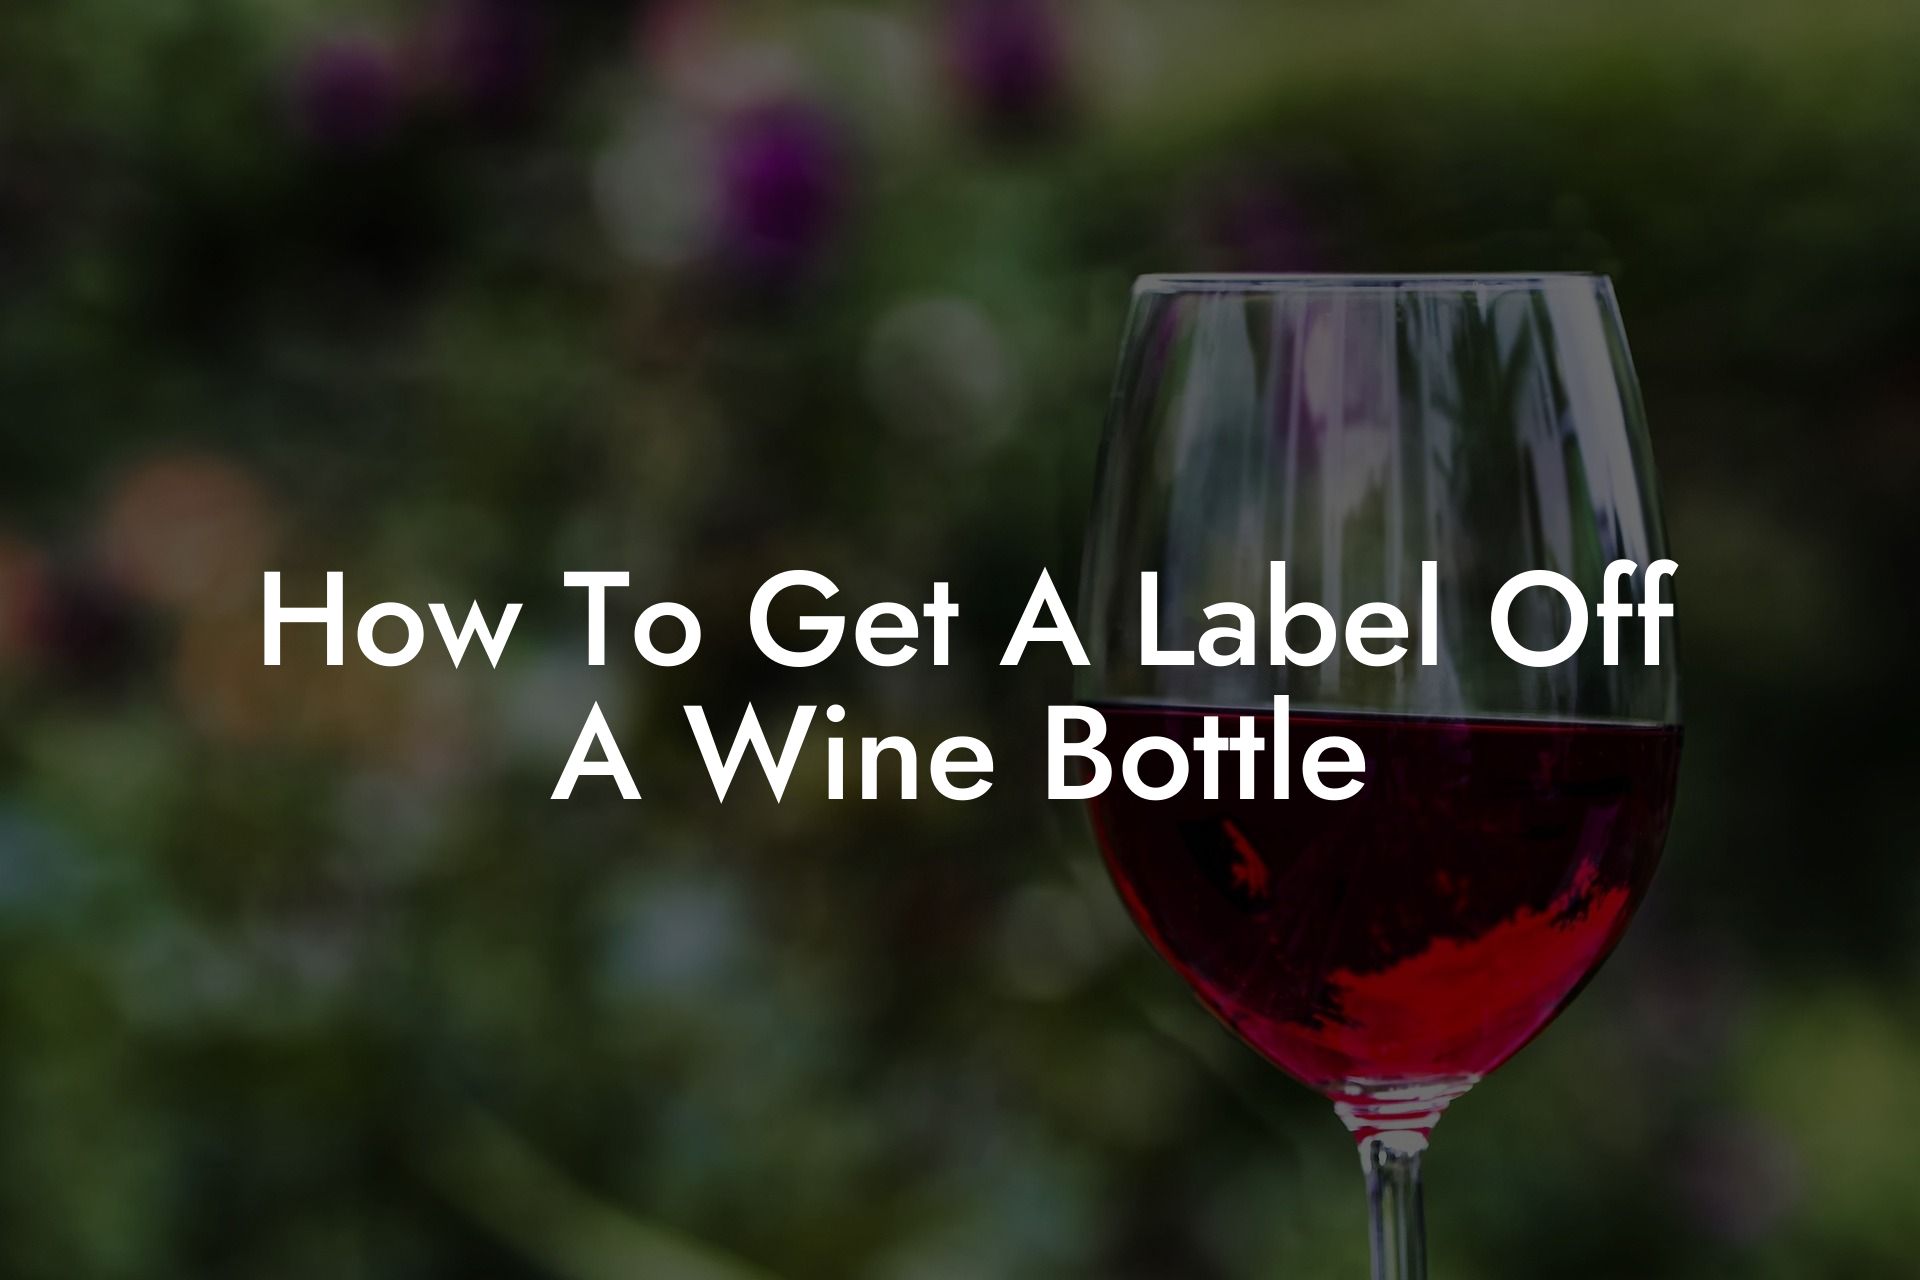 How To Get A Label Off A Wine Bottle